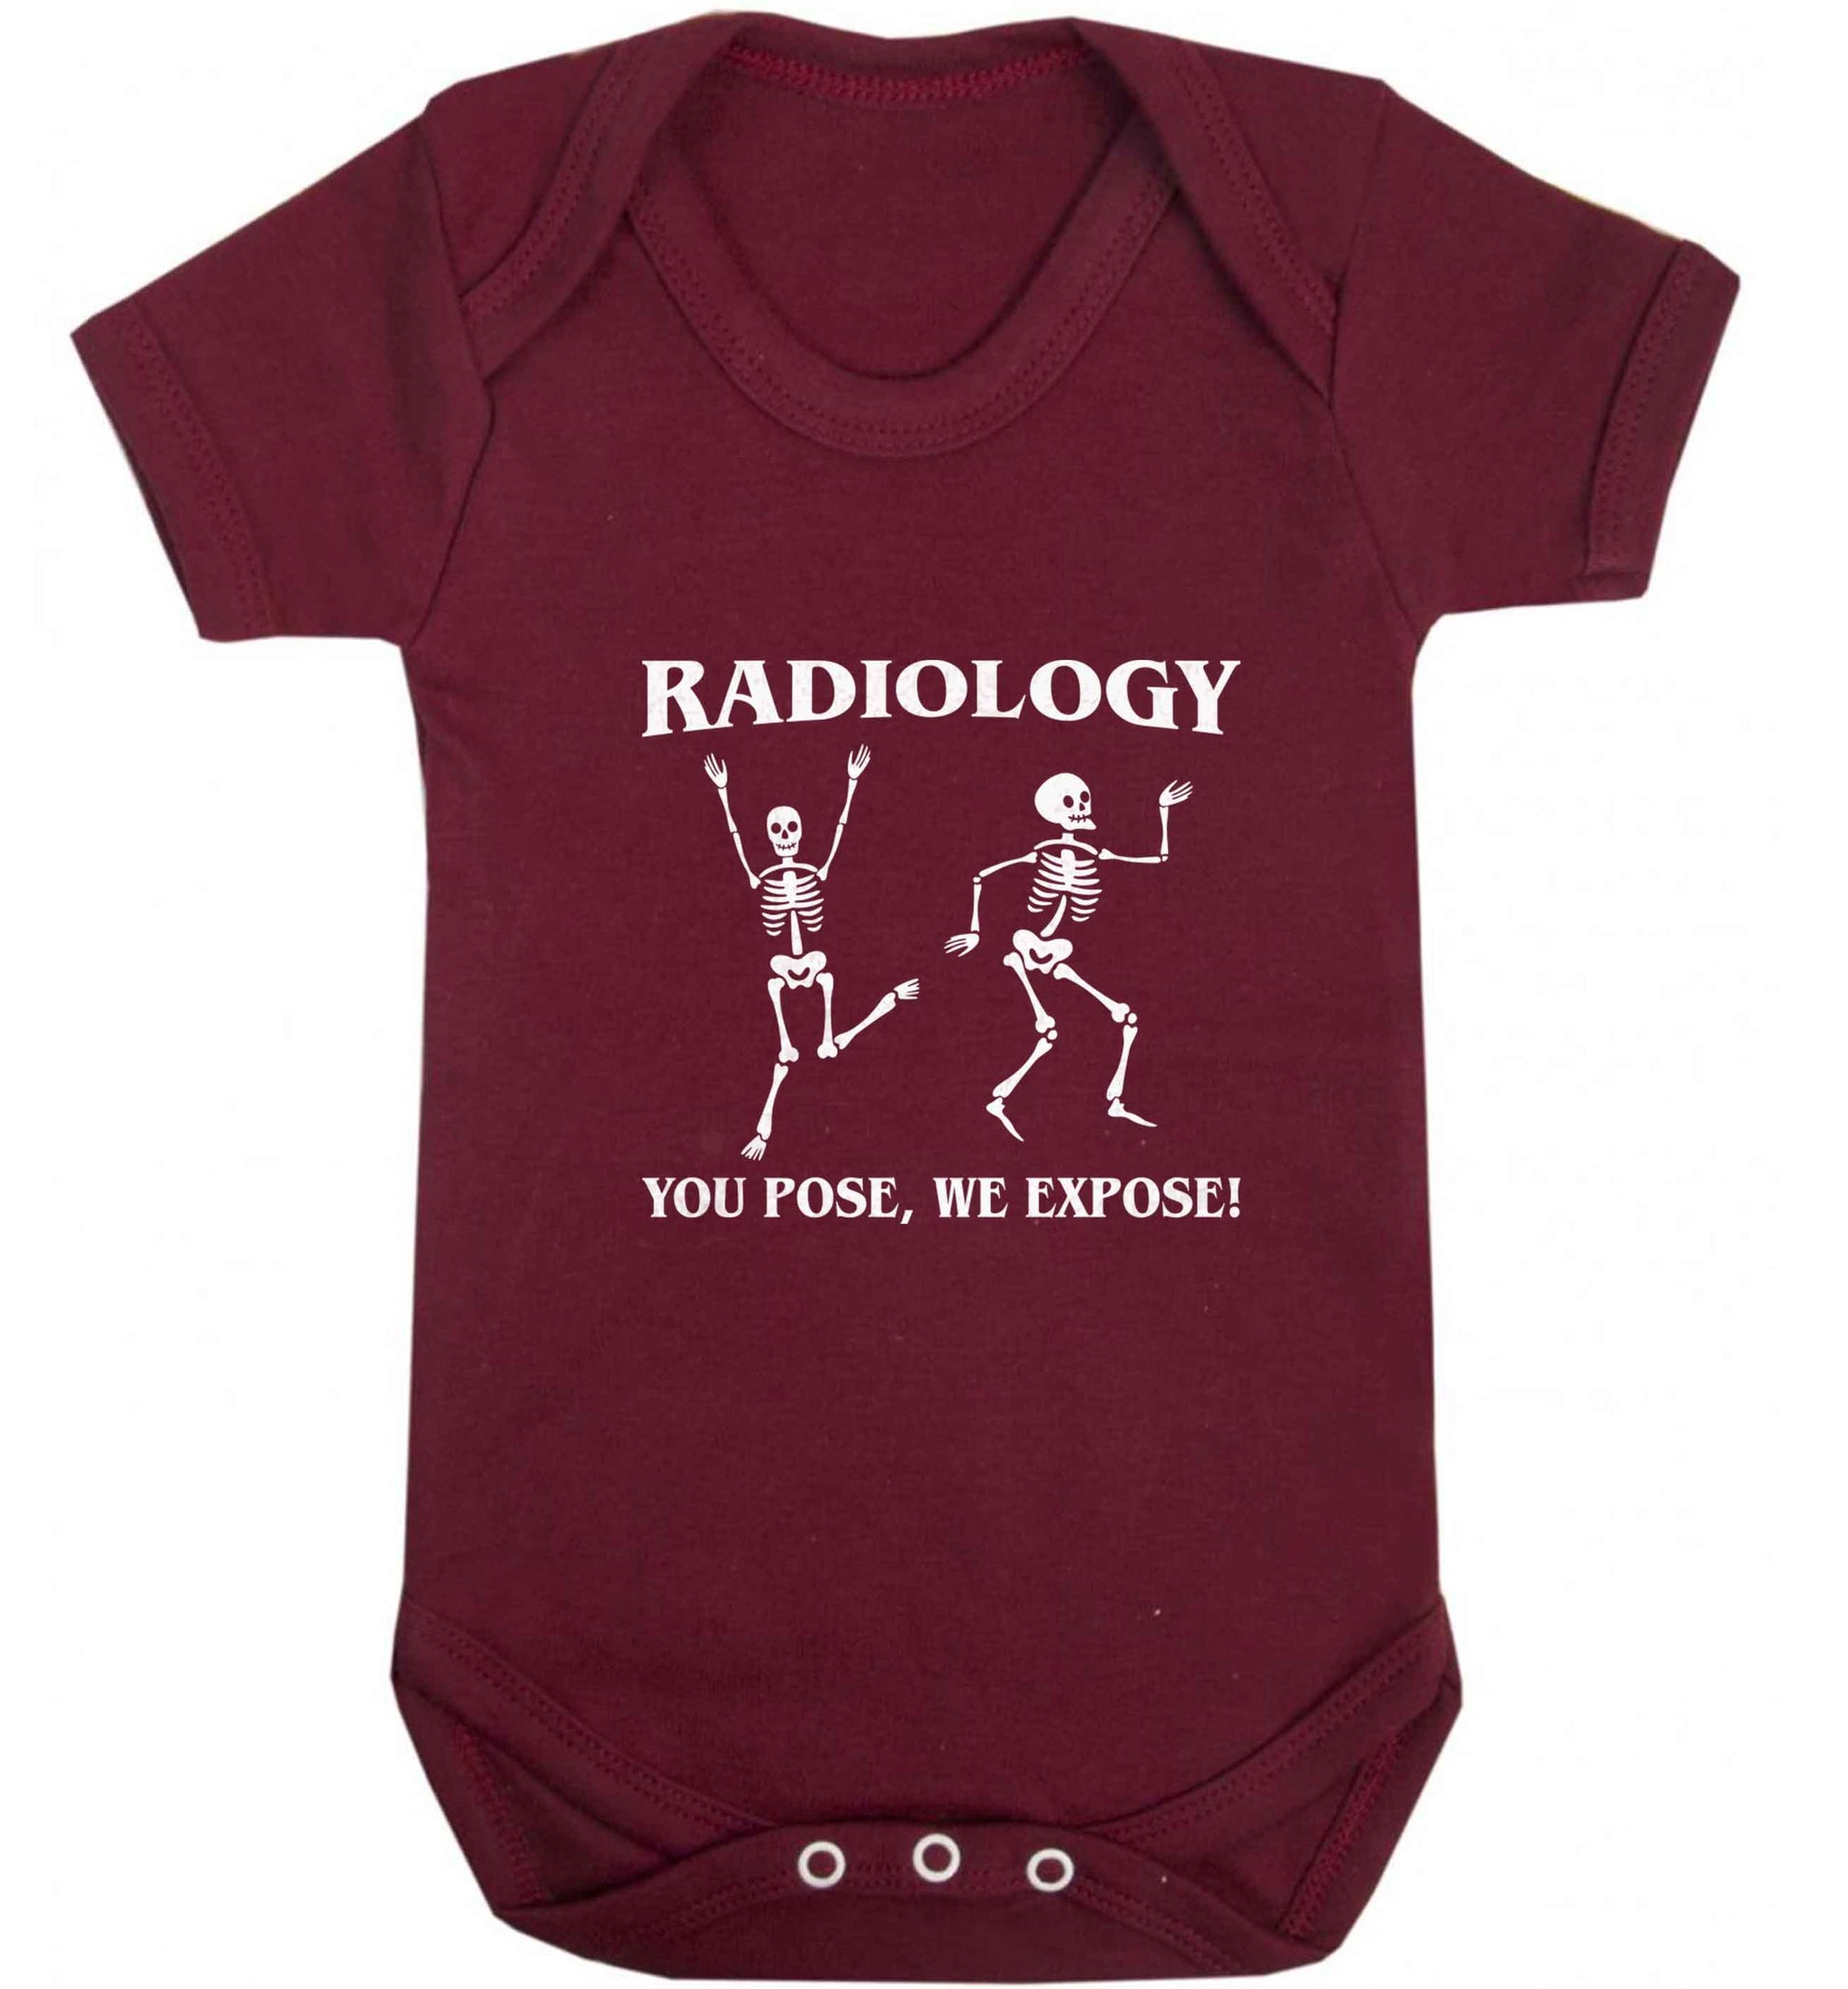 Radiology you pose we expose baby vest maroon 18-24 months